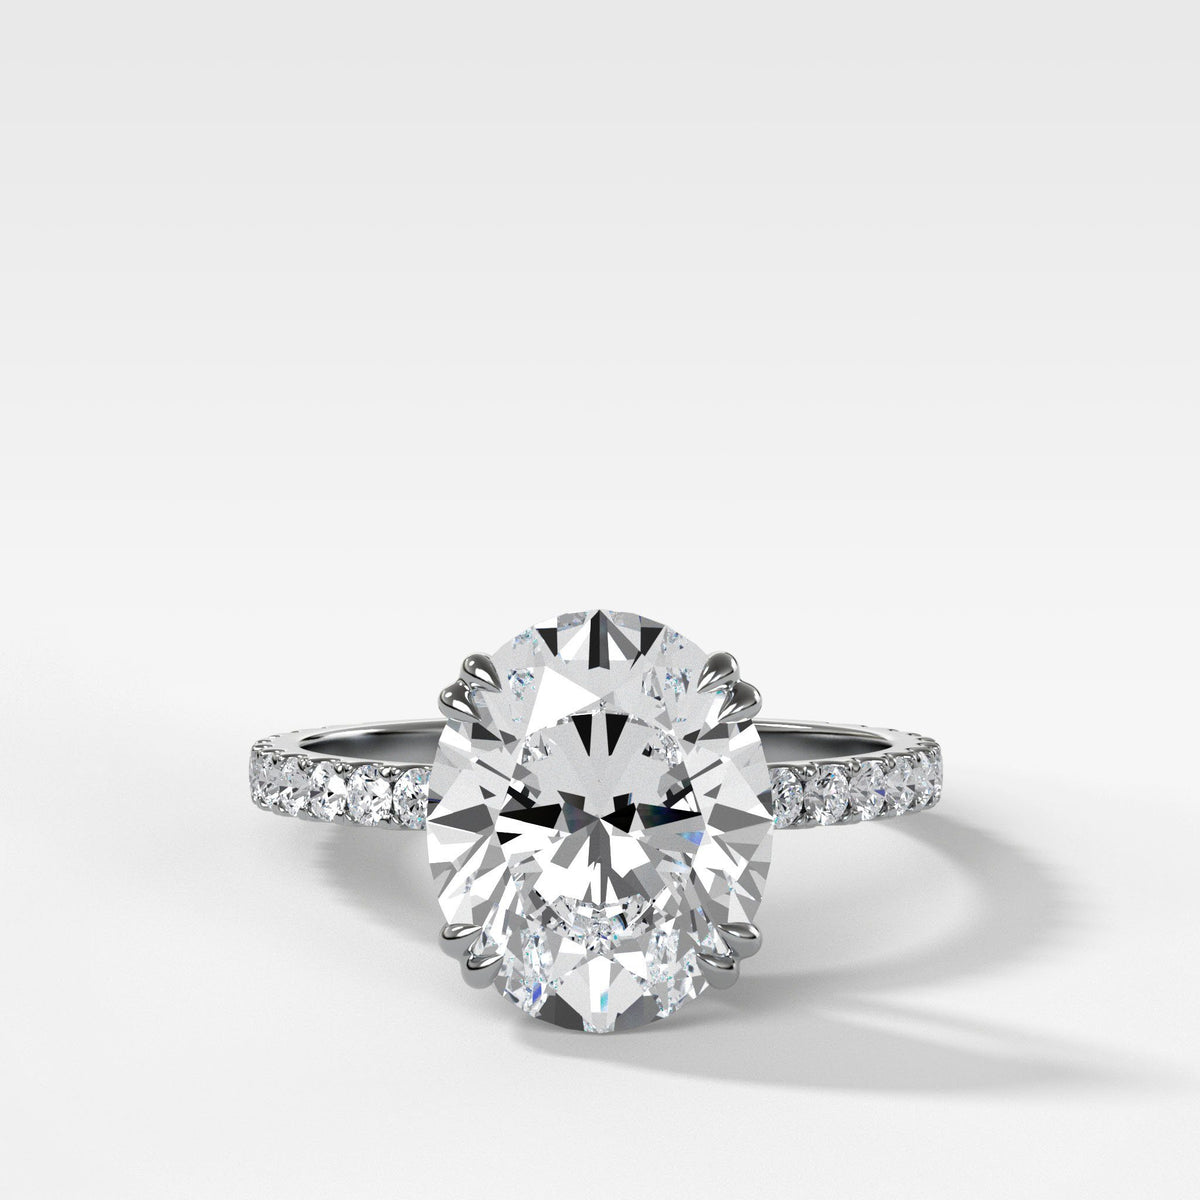 Signature Pavé Engagement Ring With Oval Cut by Good Stone in White Gold